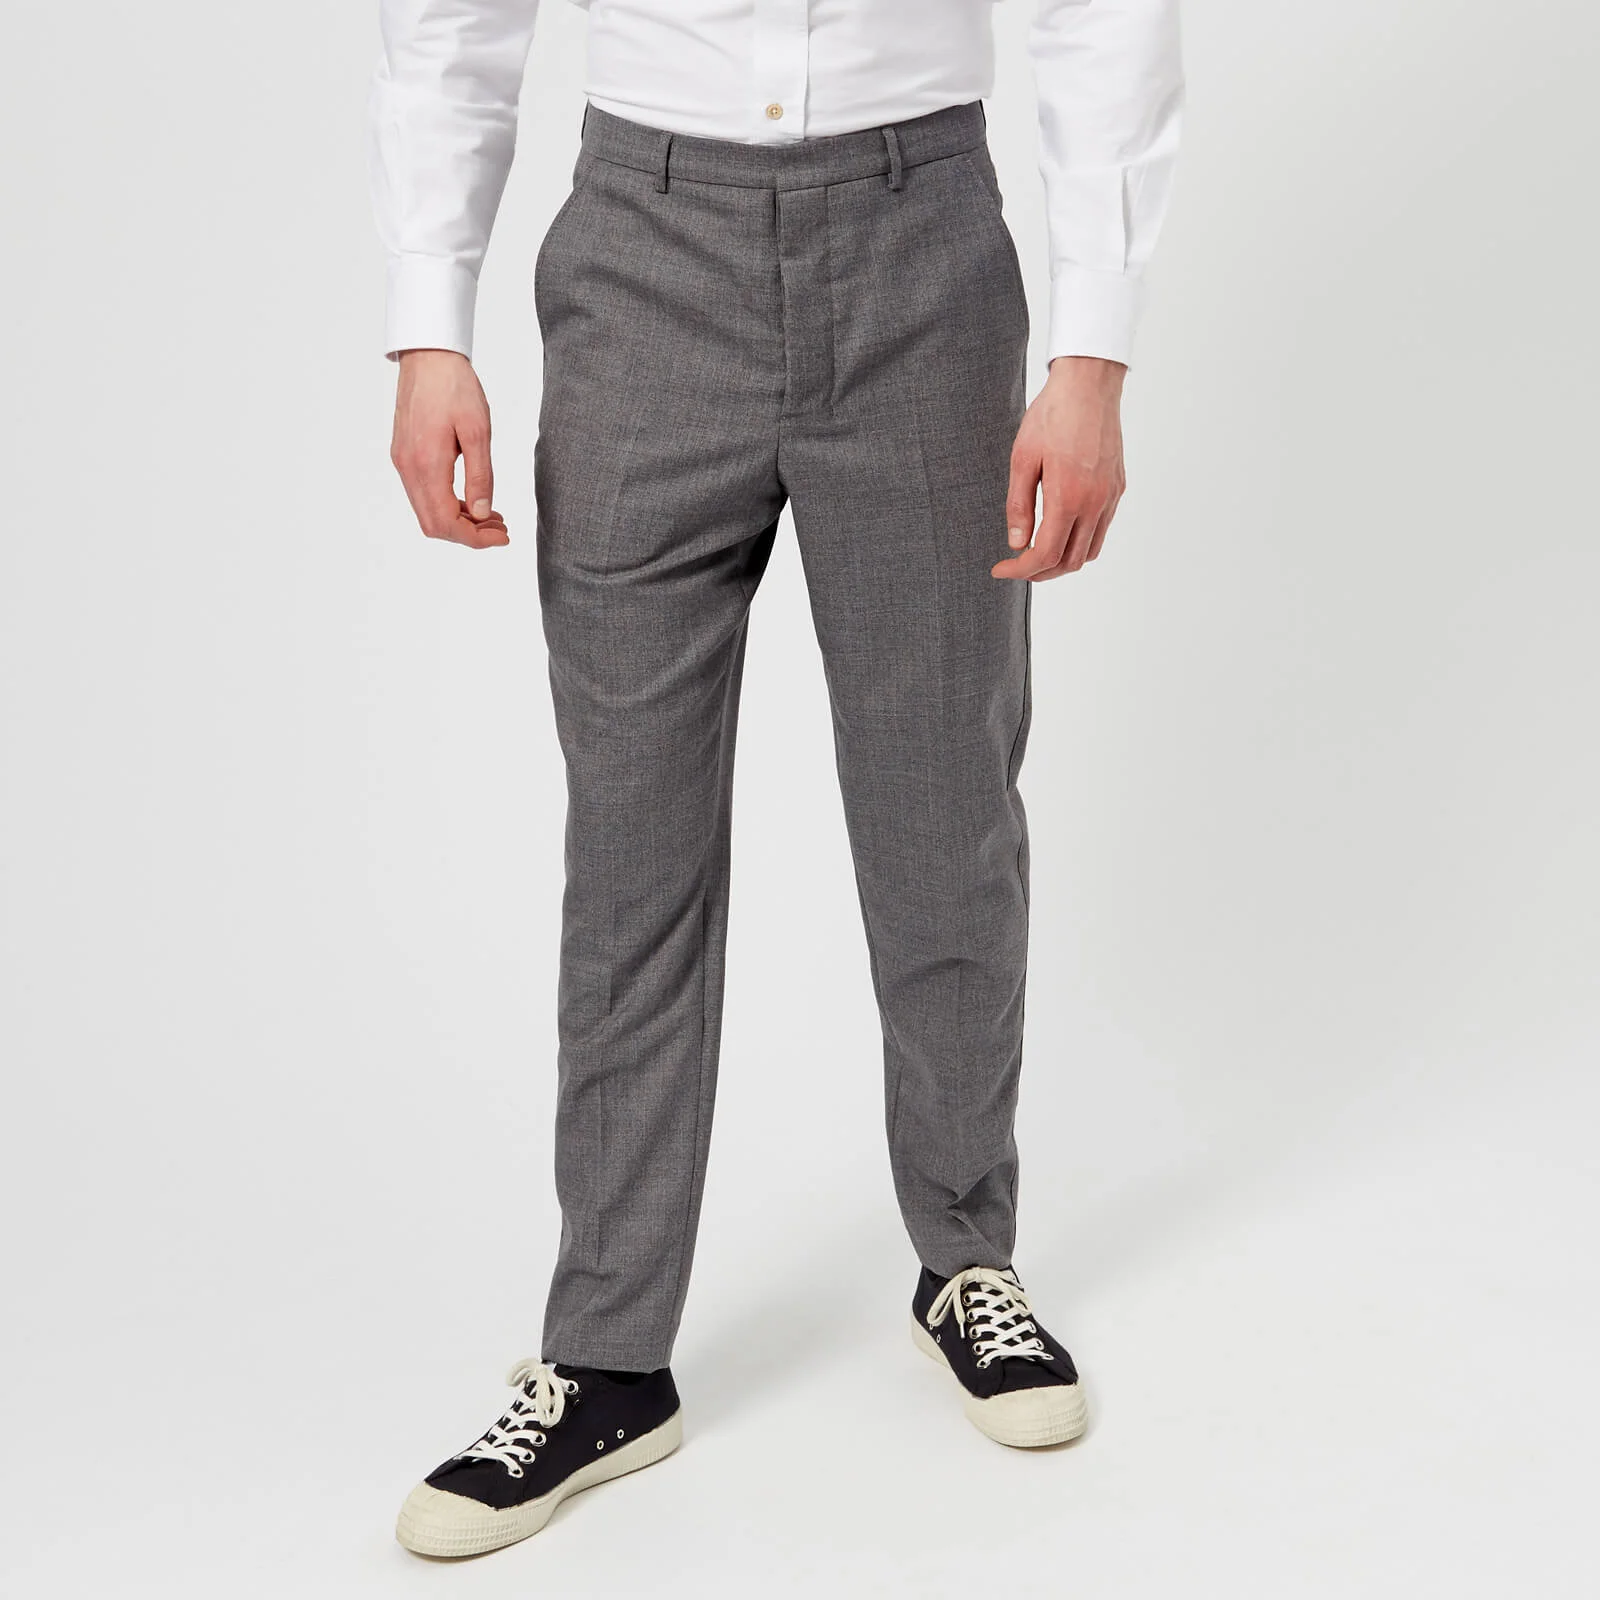 AMI Men's Carrot Fit Trousers - Heather Grey Image 1